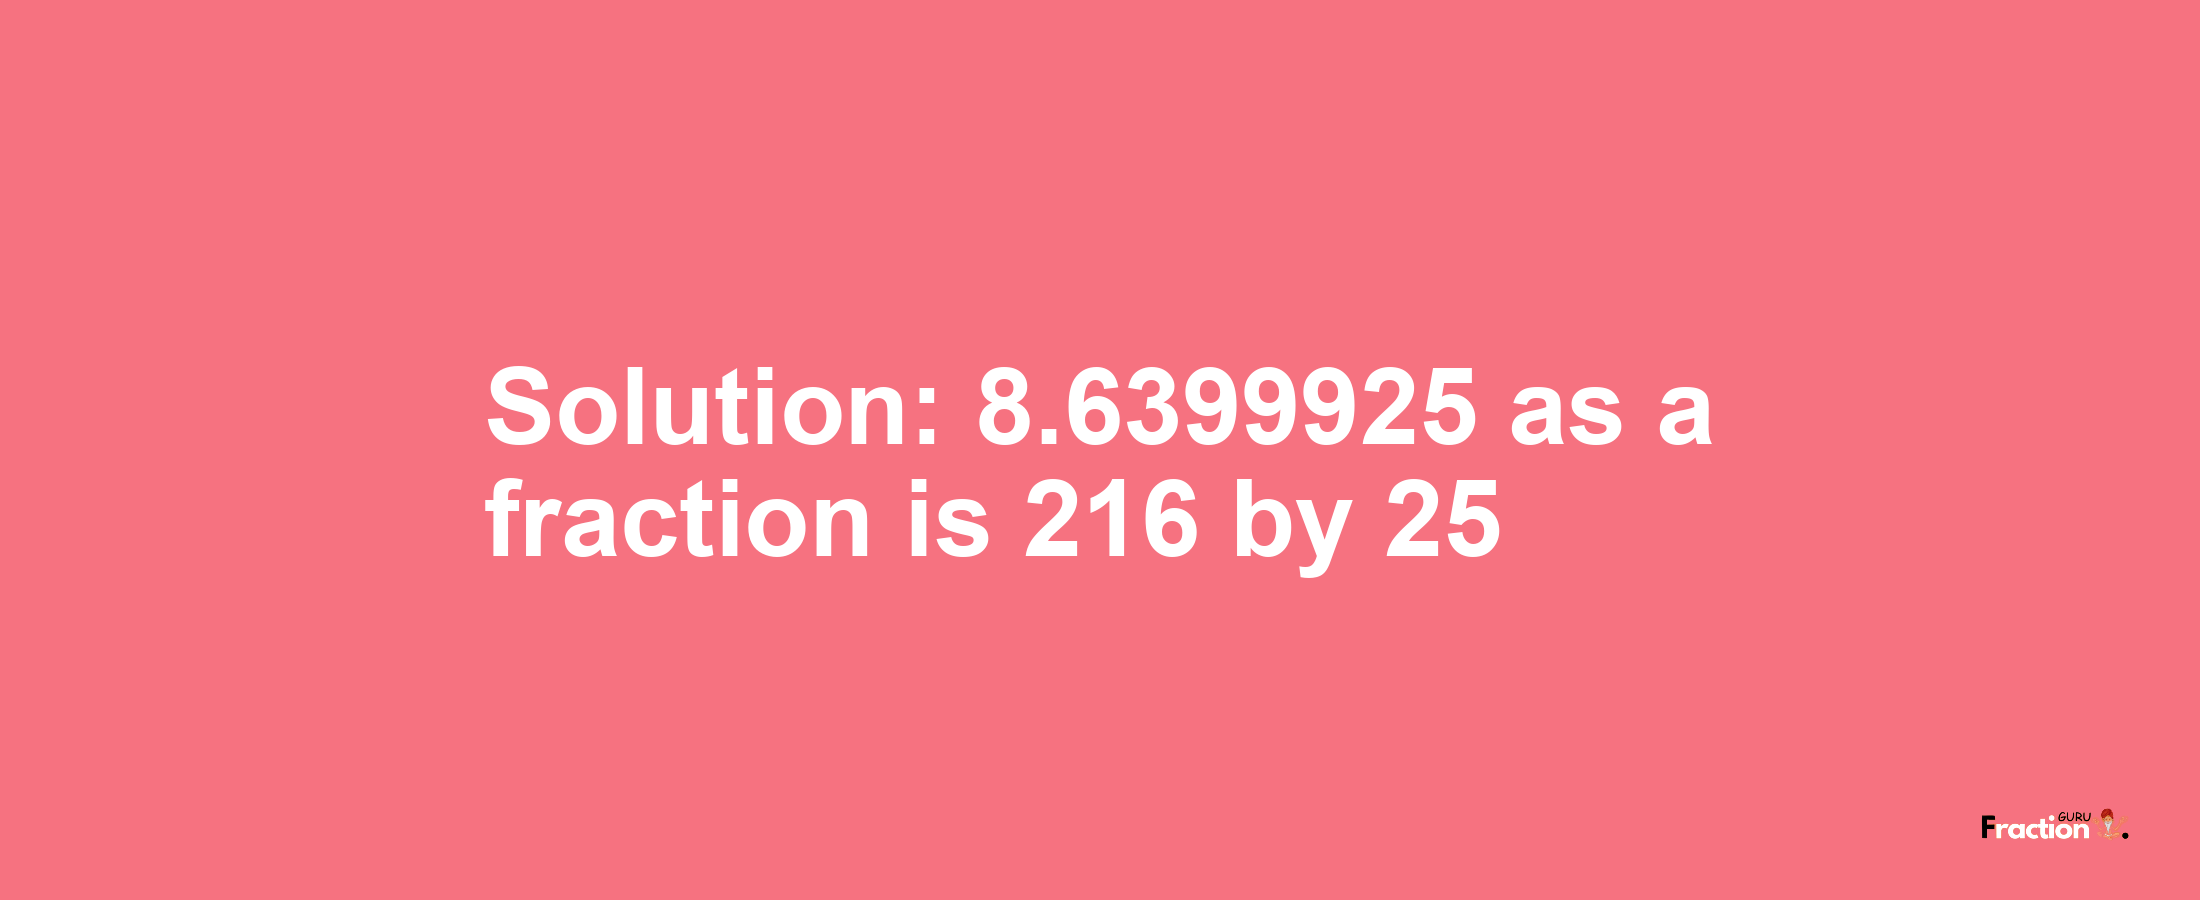 Solution:8.6399925 as a fraction is 216/25